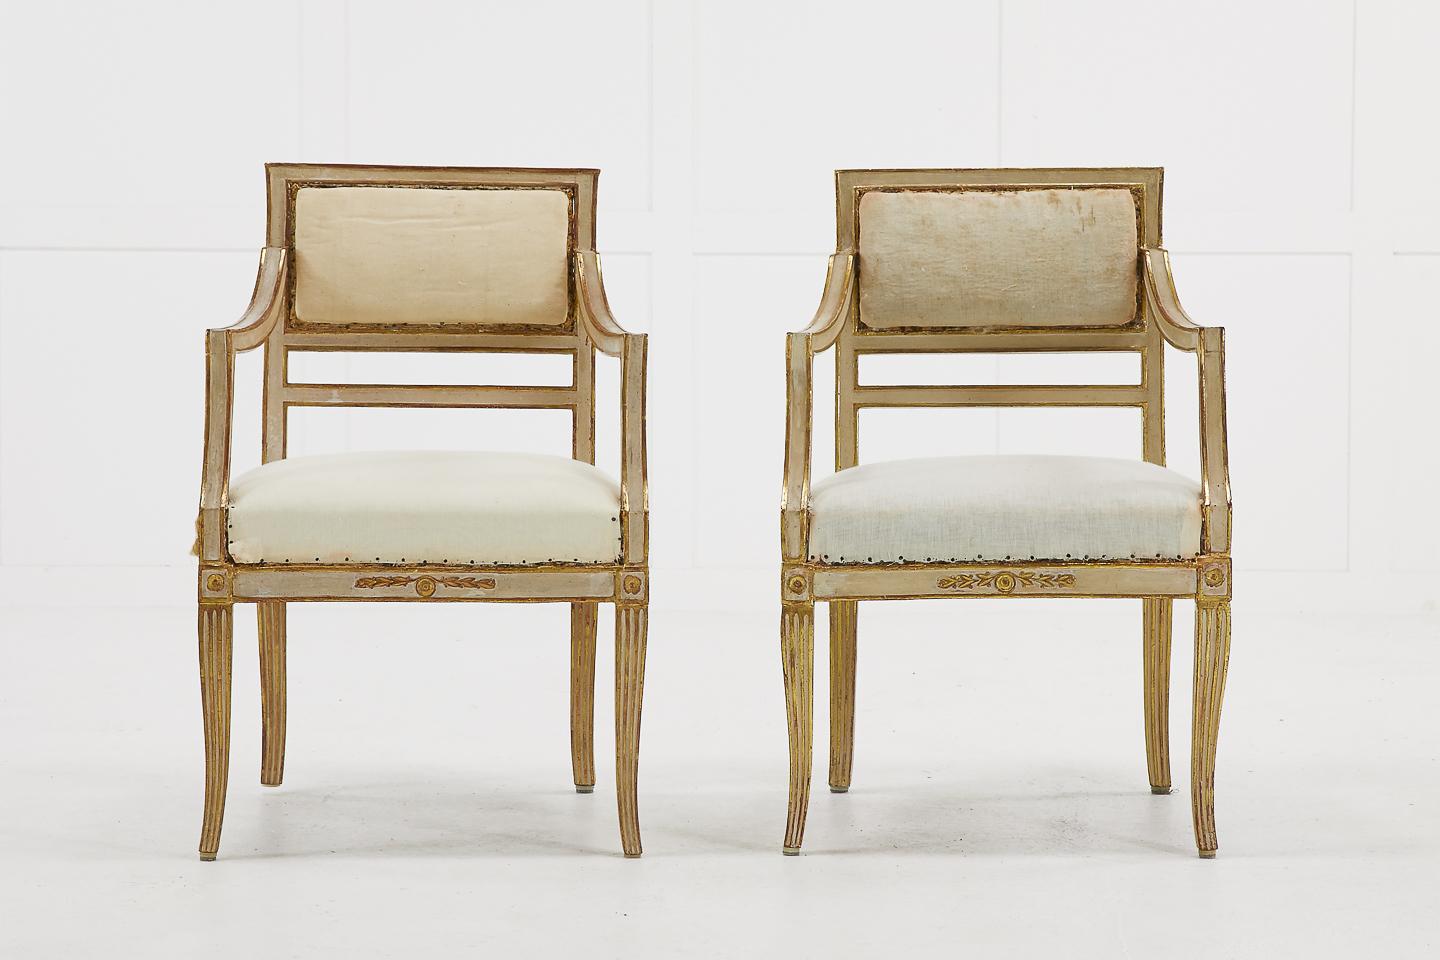 Painted Pair of Small Italian Gilt and Paint Chairs